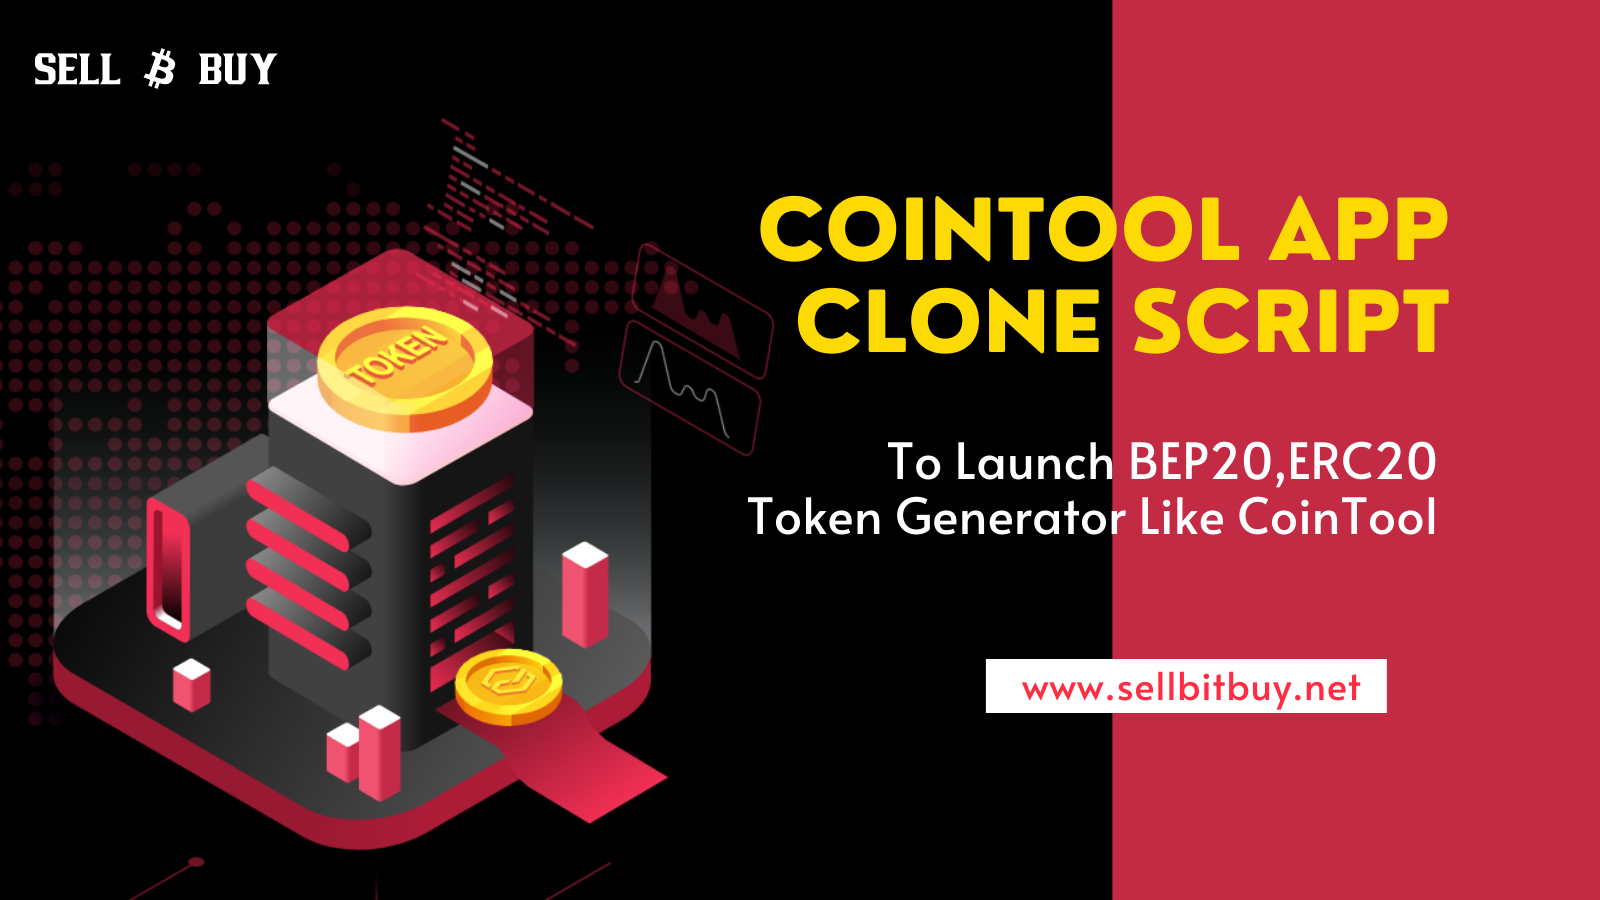 CoinTool App Clone Script To Launch BEP20, ERC20 Token Generator Like CoinTool